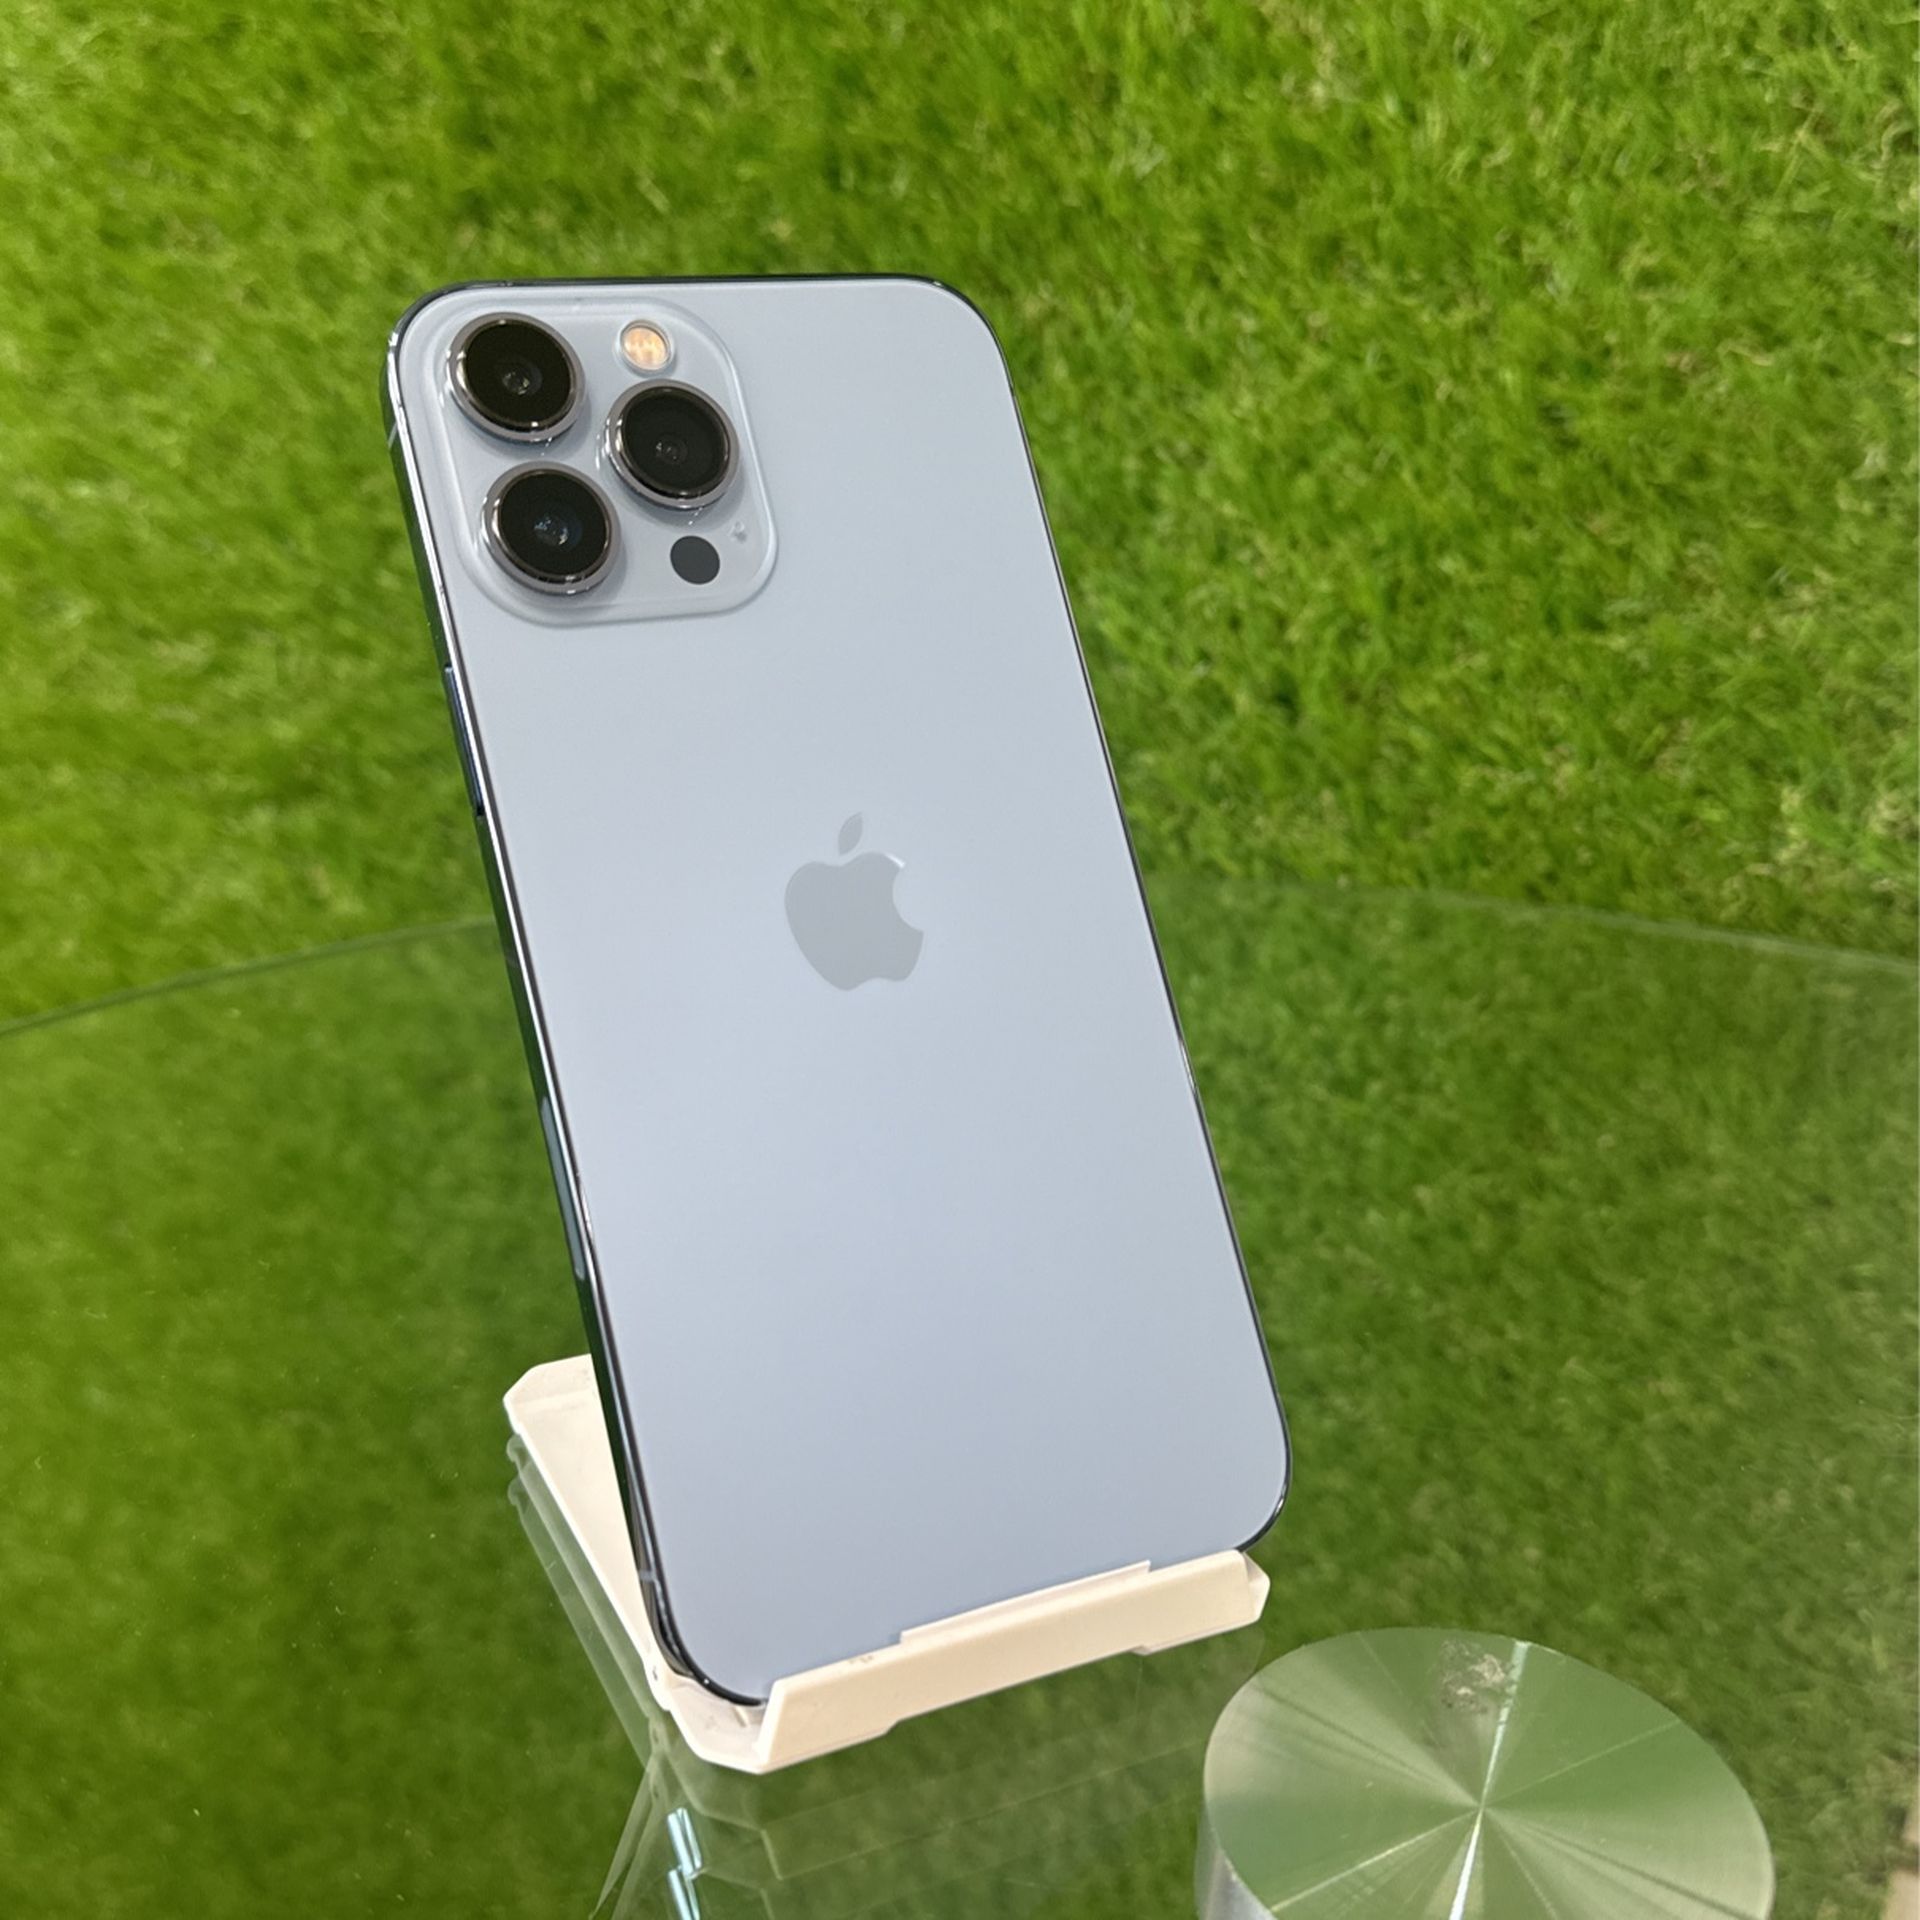 iPhone 13 Pro Max 256gb Unlocked ( Payments Available)